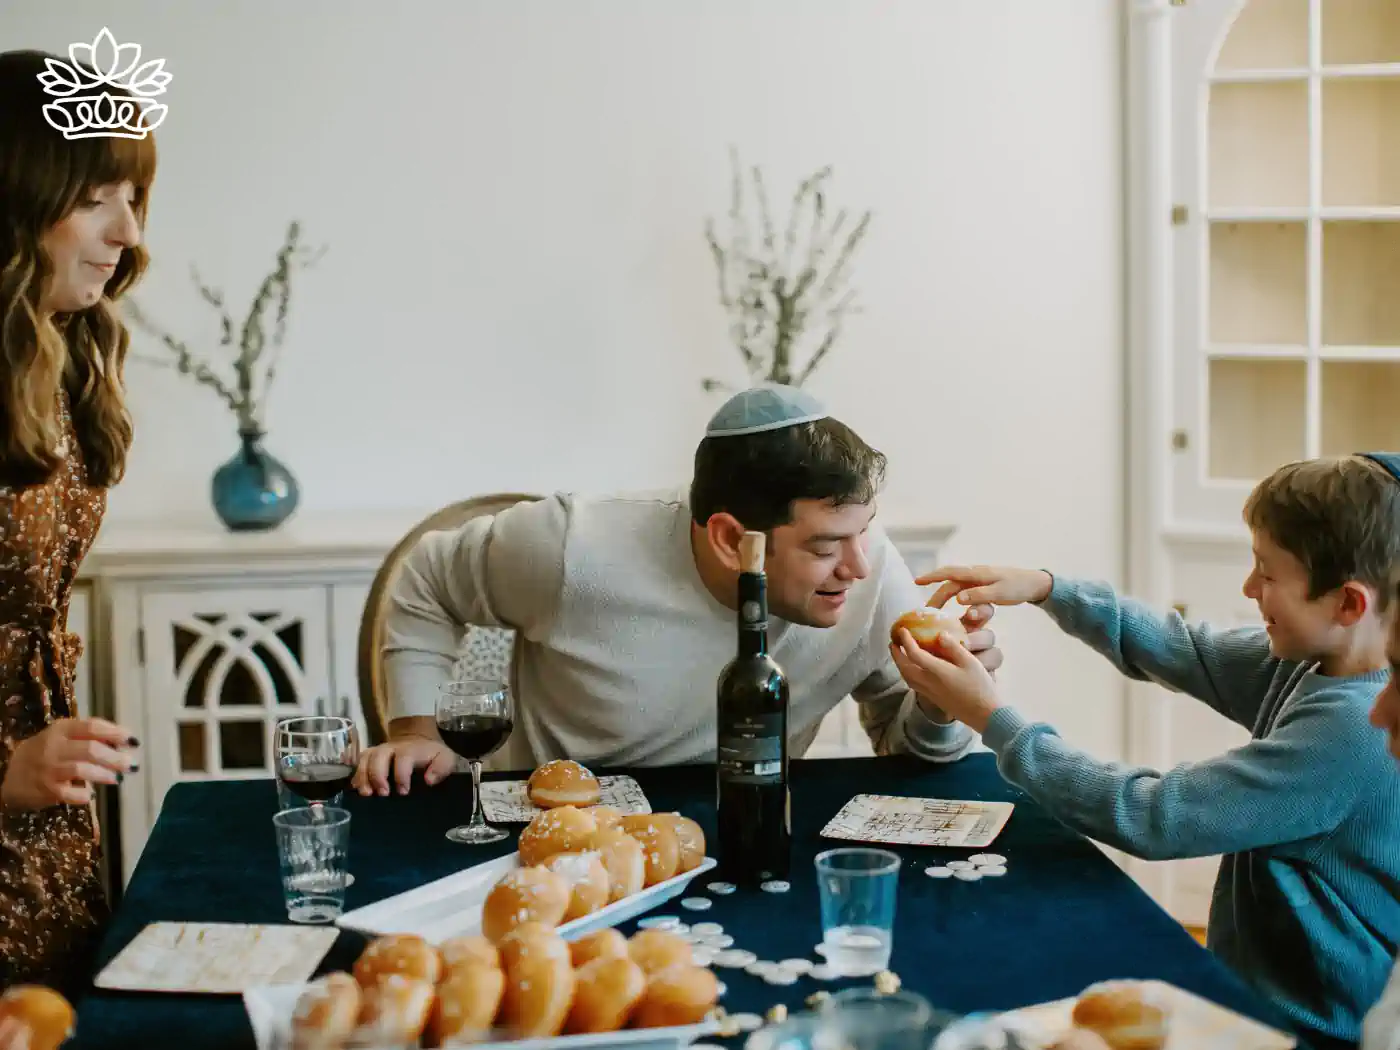 A family enjoying a meal together, with a boy offering a doughnut to a man, symbolizing Hanukkah traditions. Fabulous Flowers and Gifts - Hanukkah Collection.